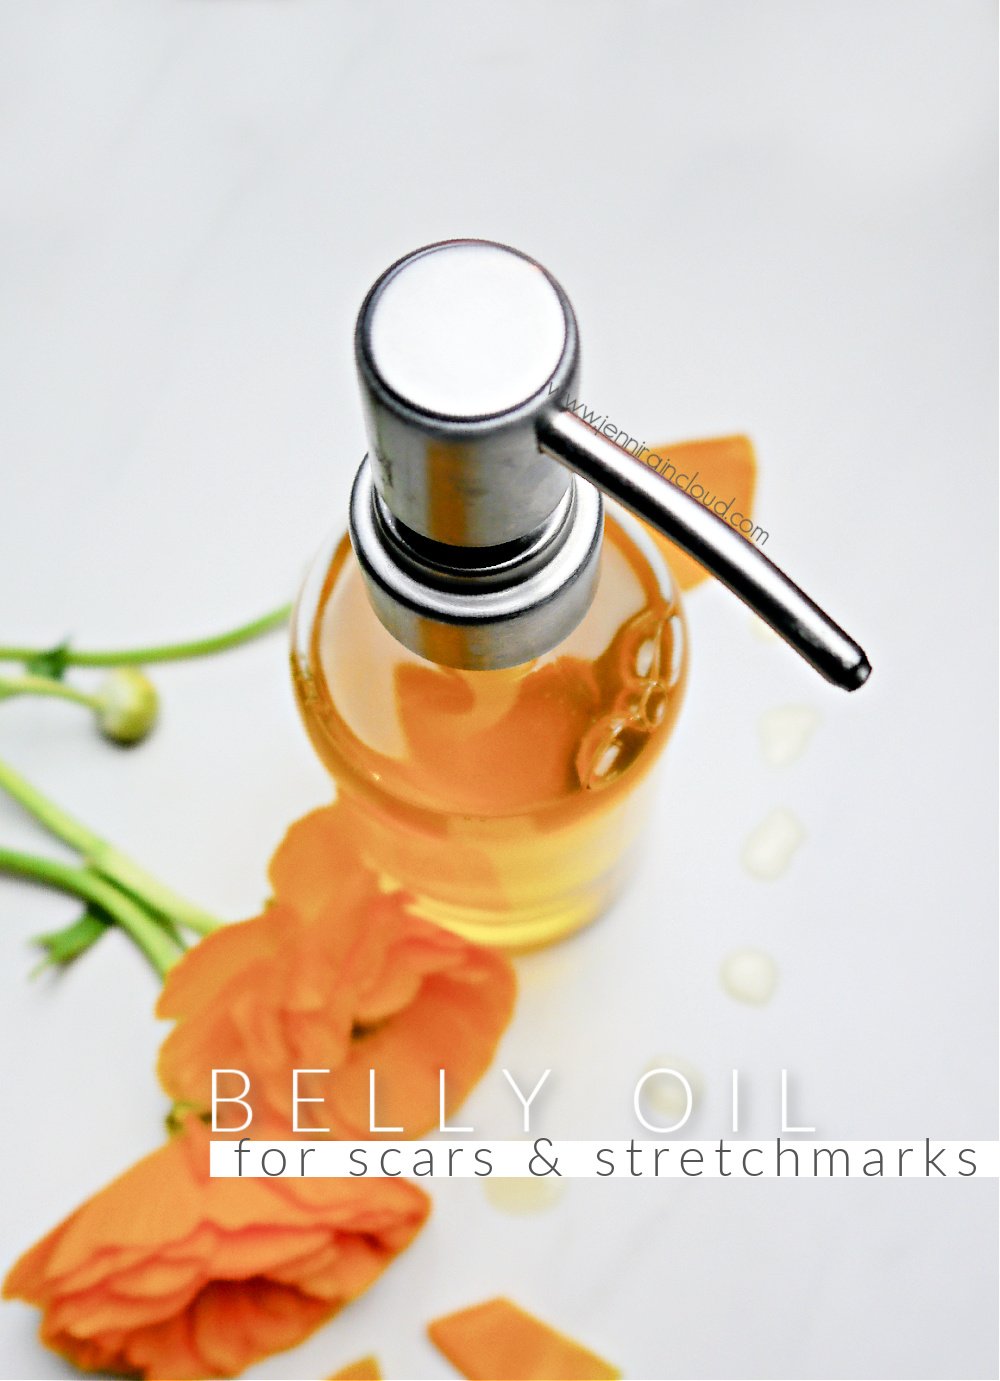 Homemade Belly Oil for stretch marks and scars